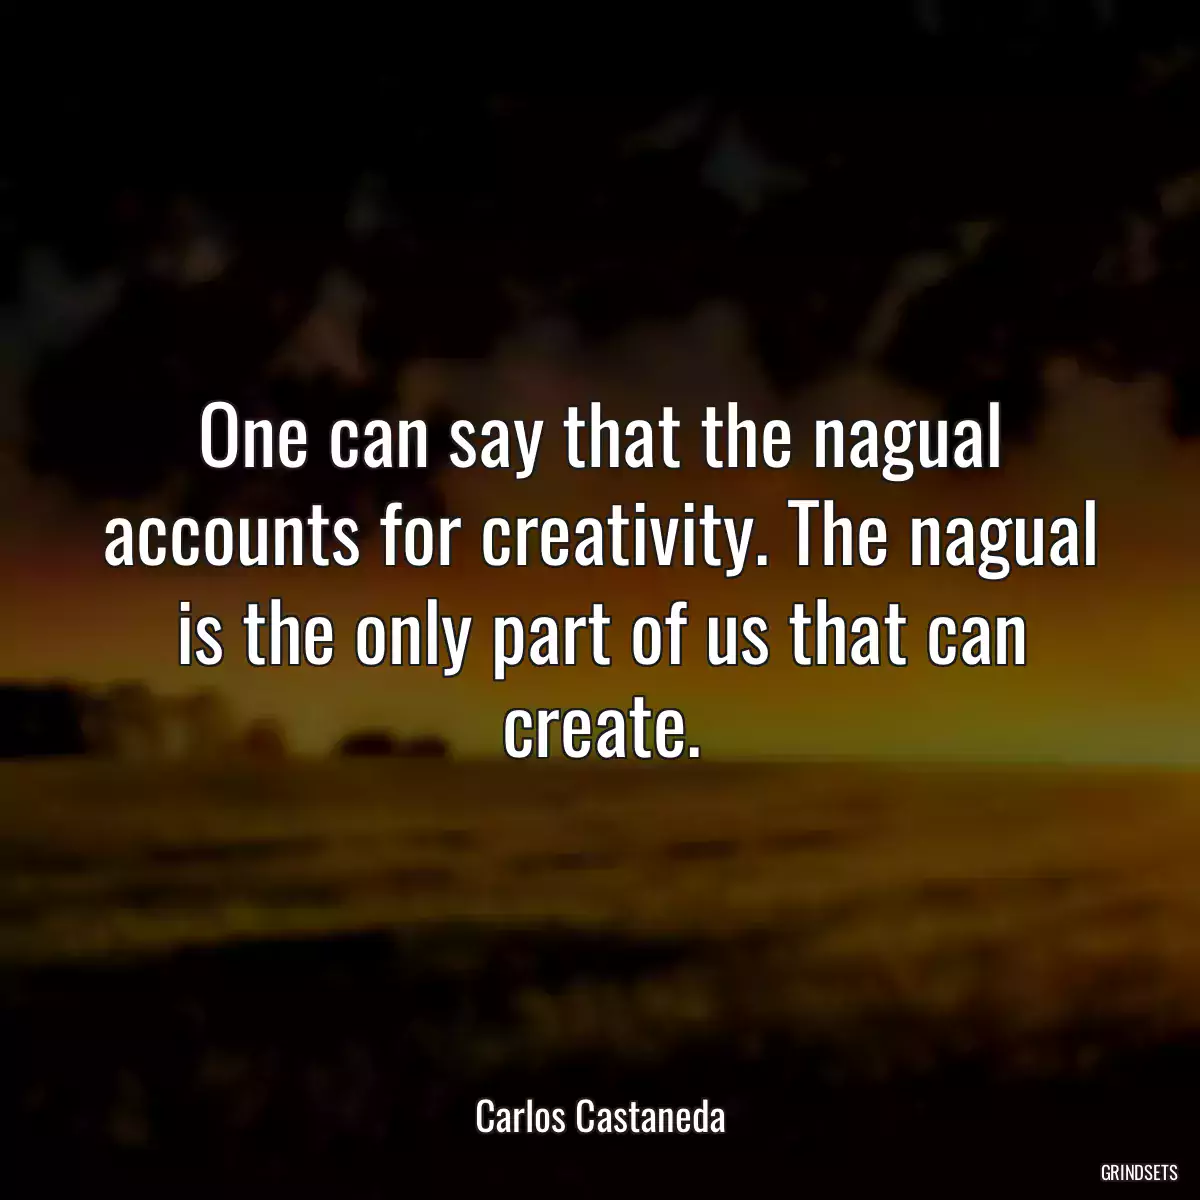 One can say that the nagual accounts for creativity. The nagual is the only part of us that can create.